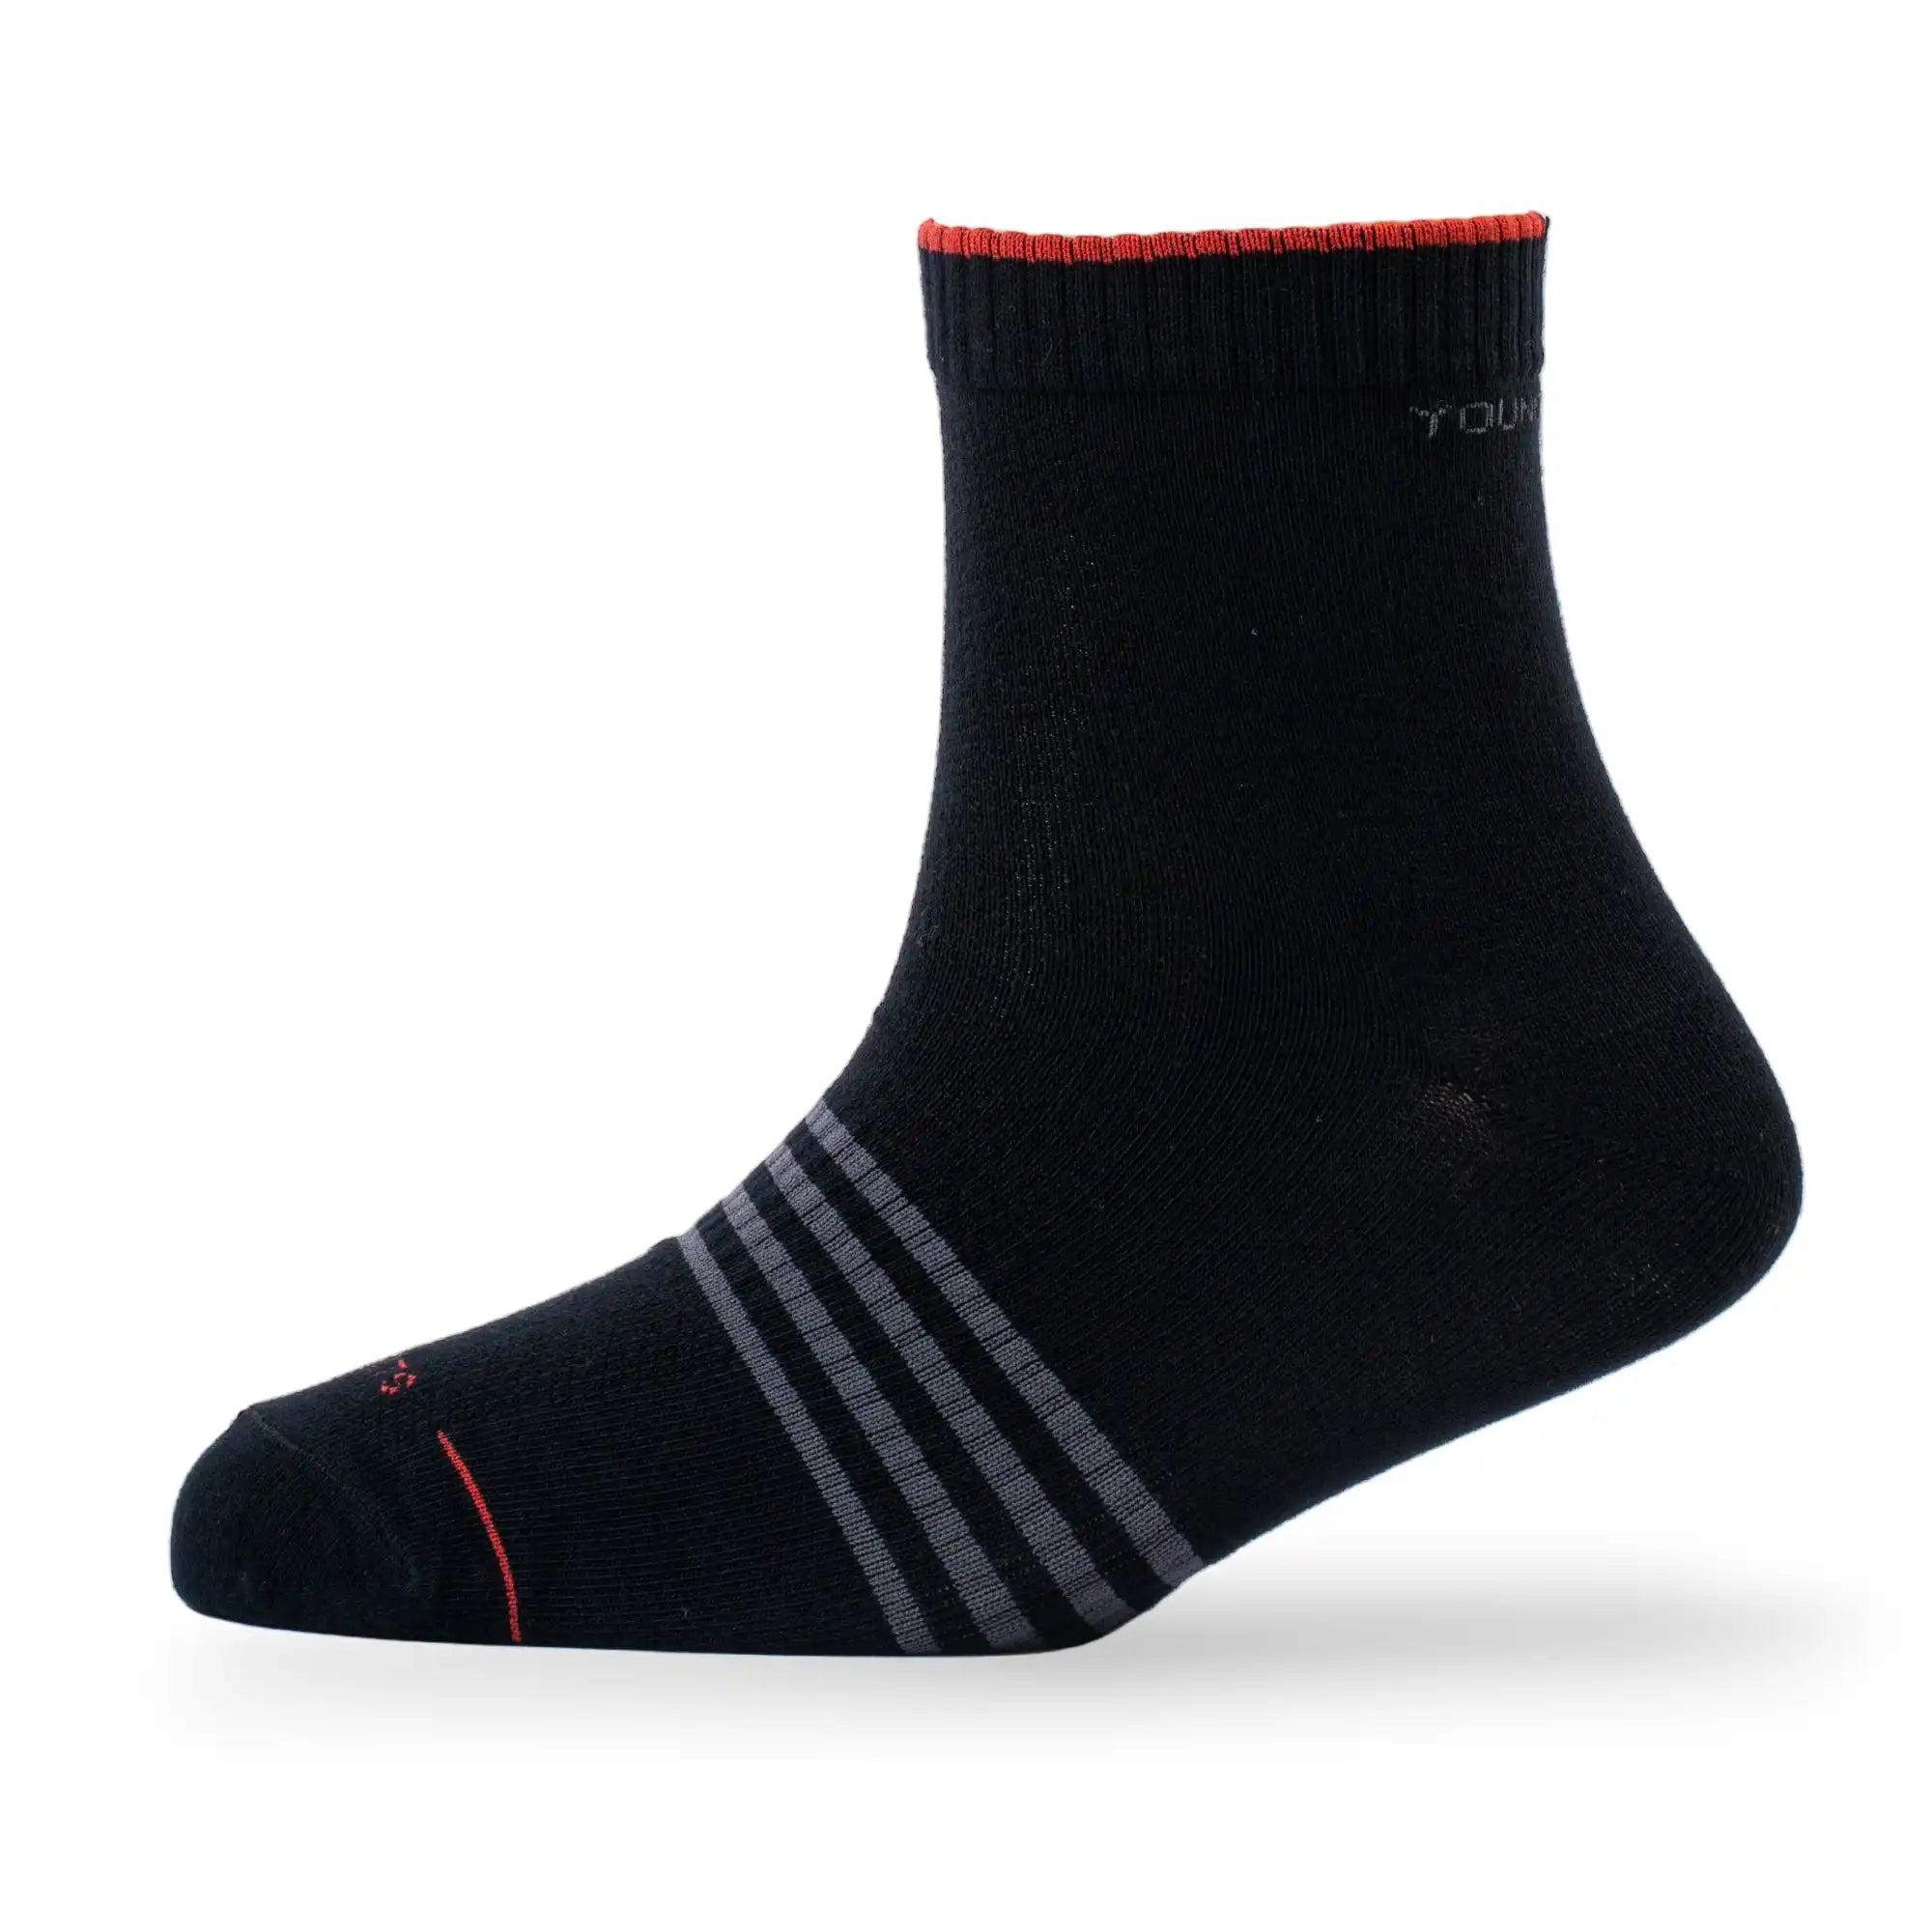 Young Wings Men's Multi Colour Cotton Fabric Design Ankle Length Socks - Pack of 5, Style no. M1-2110 N